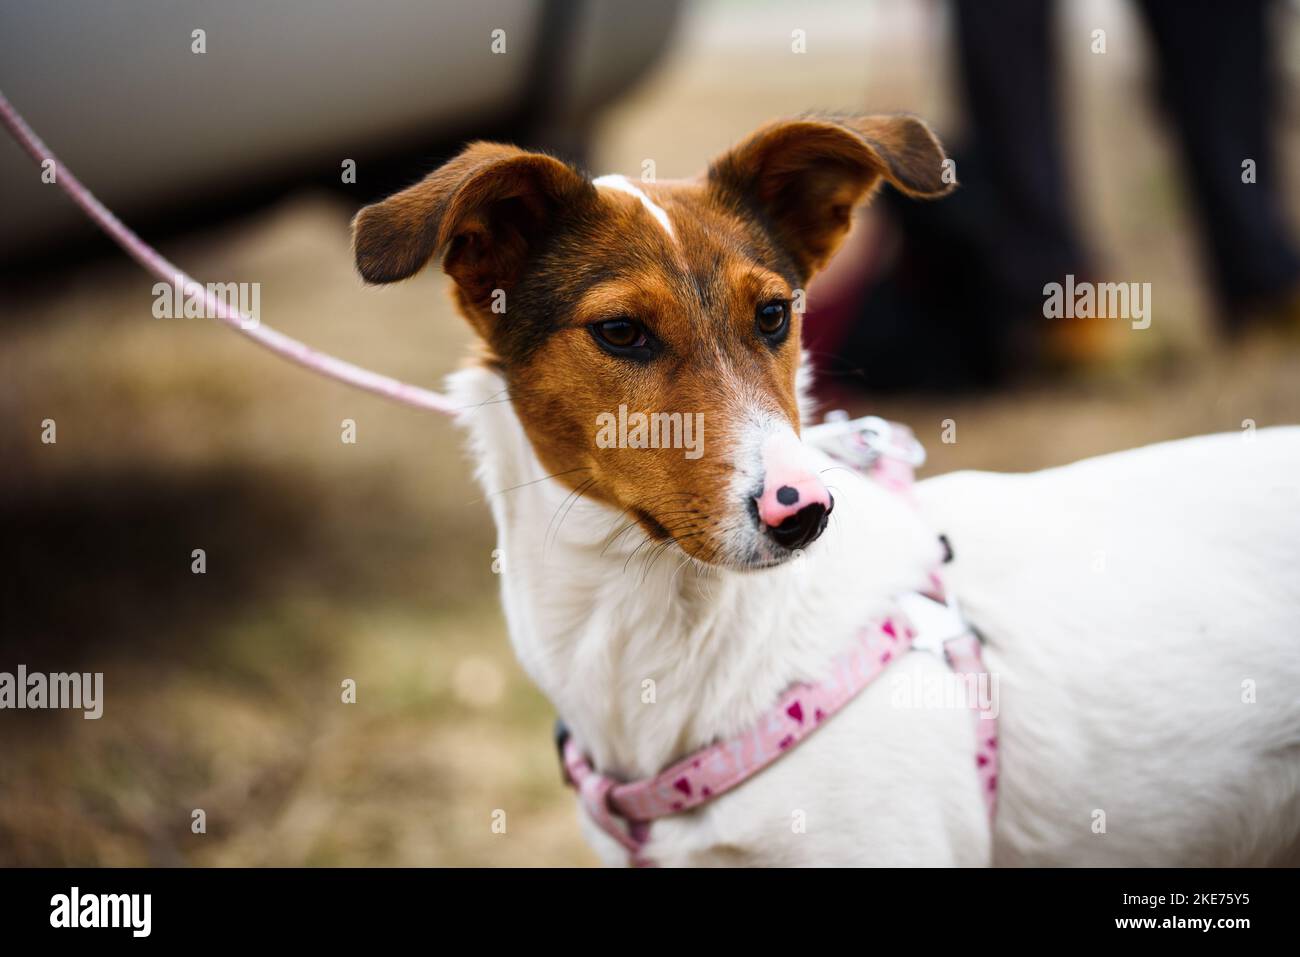 Portrait of young Jack Russel dog. Small dog. Stock Photo